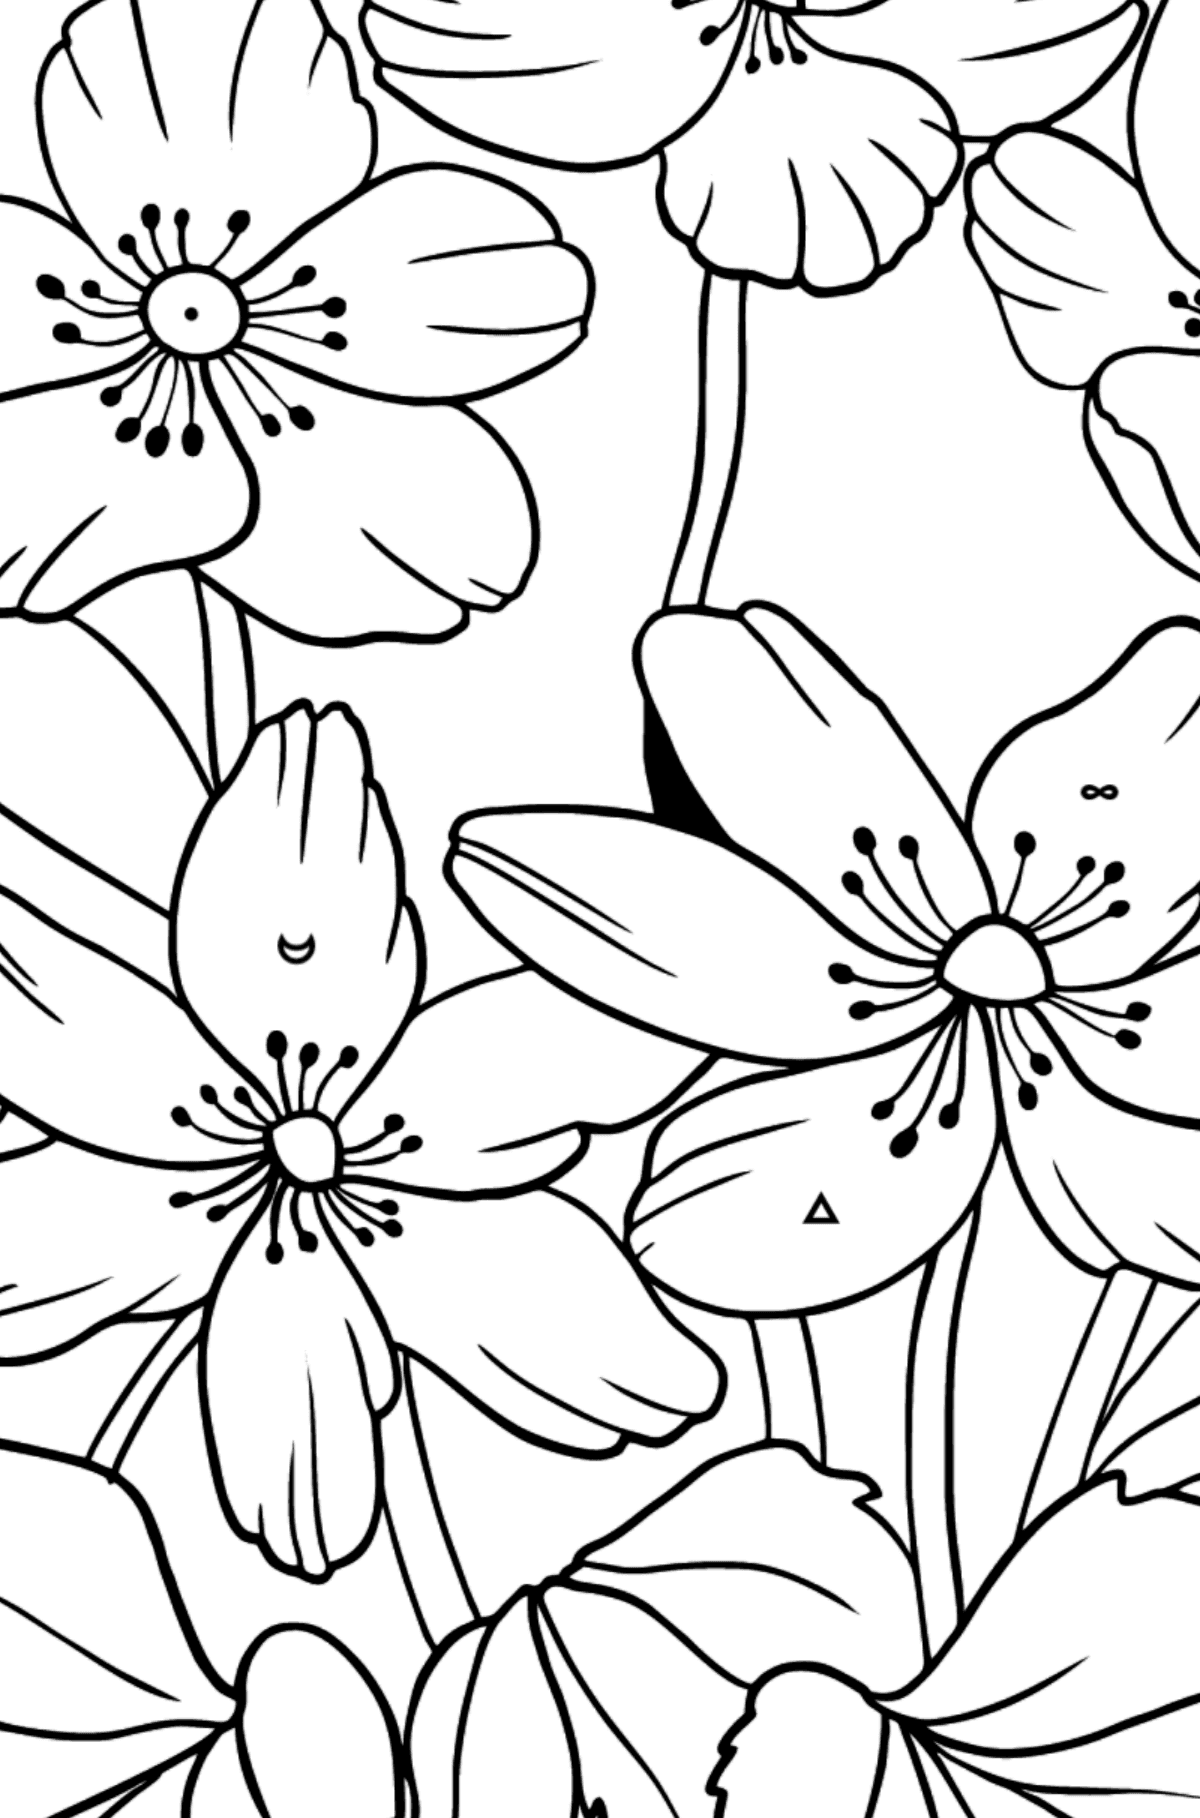 Flower Coloring Page - A Pastel Yellow Windflower - Coloring by Symbols and Geometric Shapes for Kids